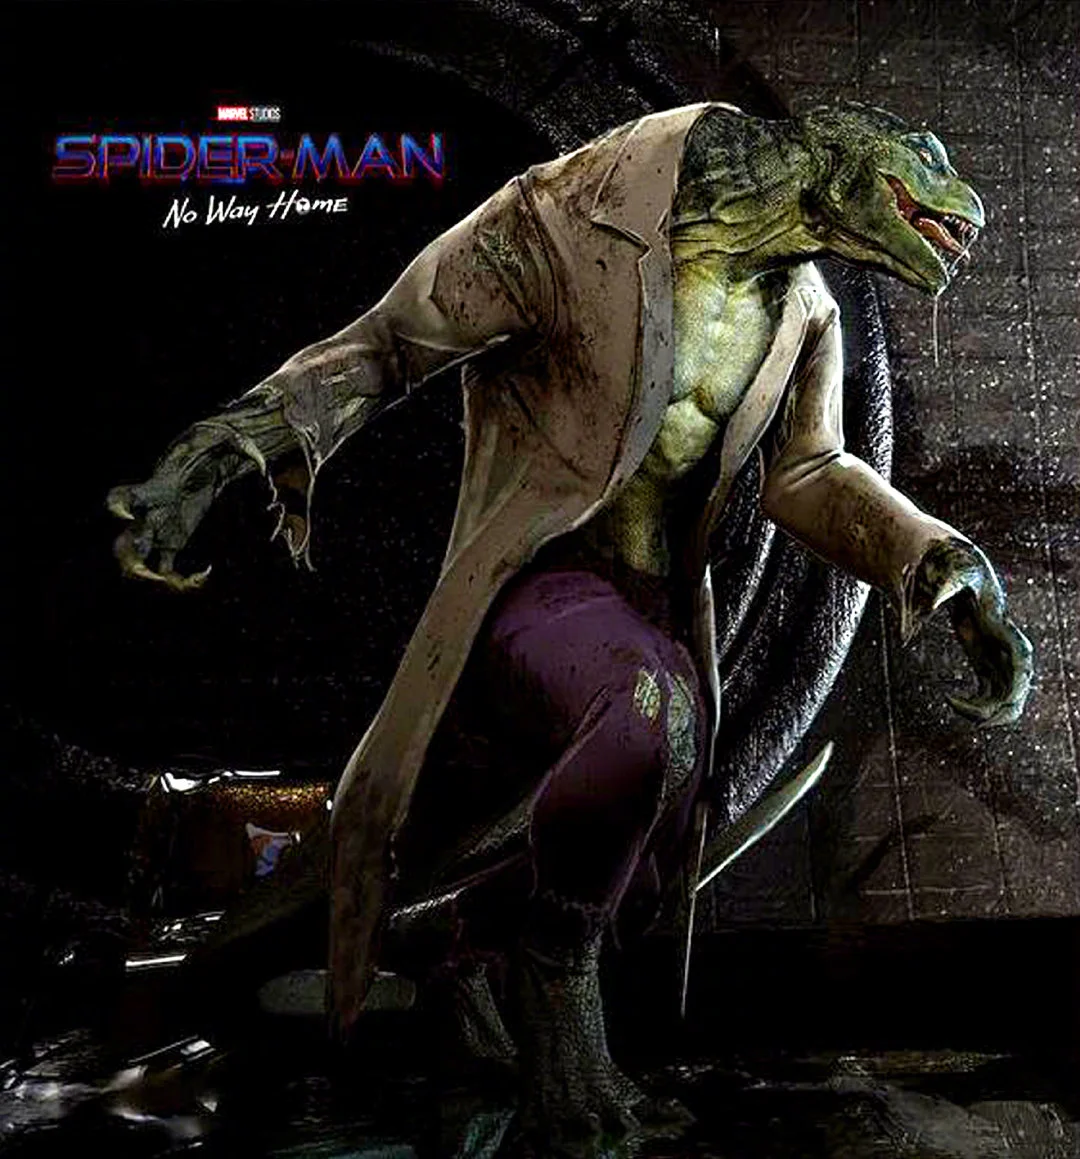 Early concept design for Lizard in 'Spider-Man: No Way Home' revealed